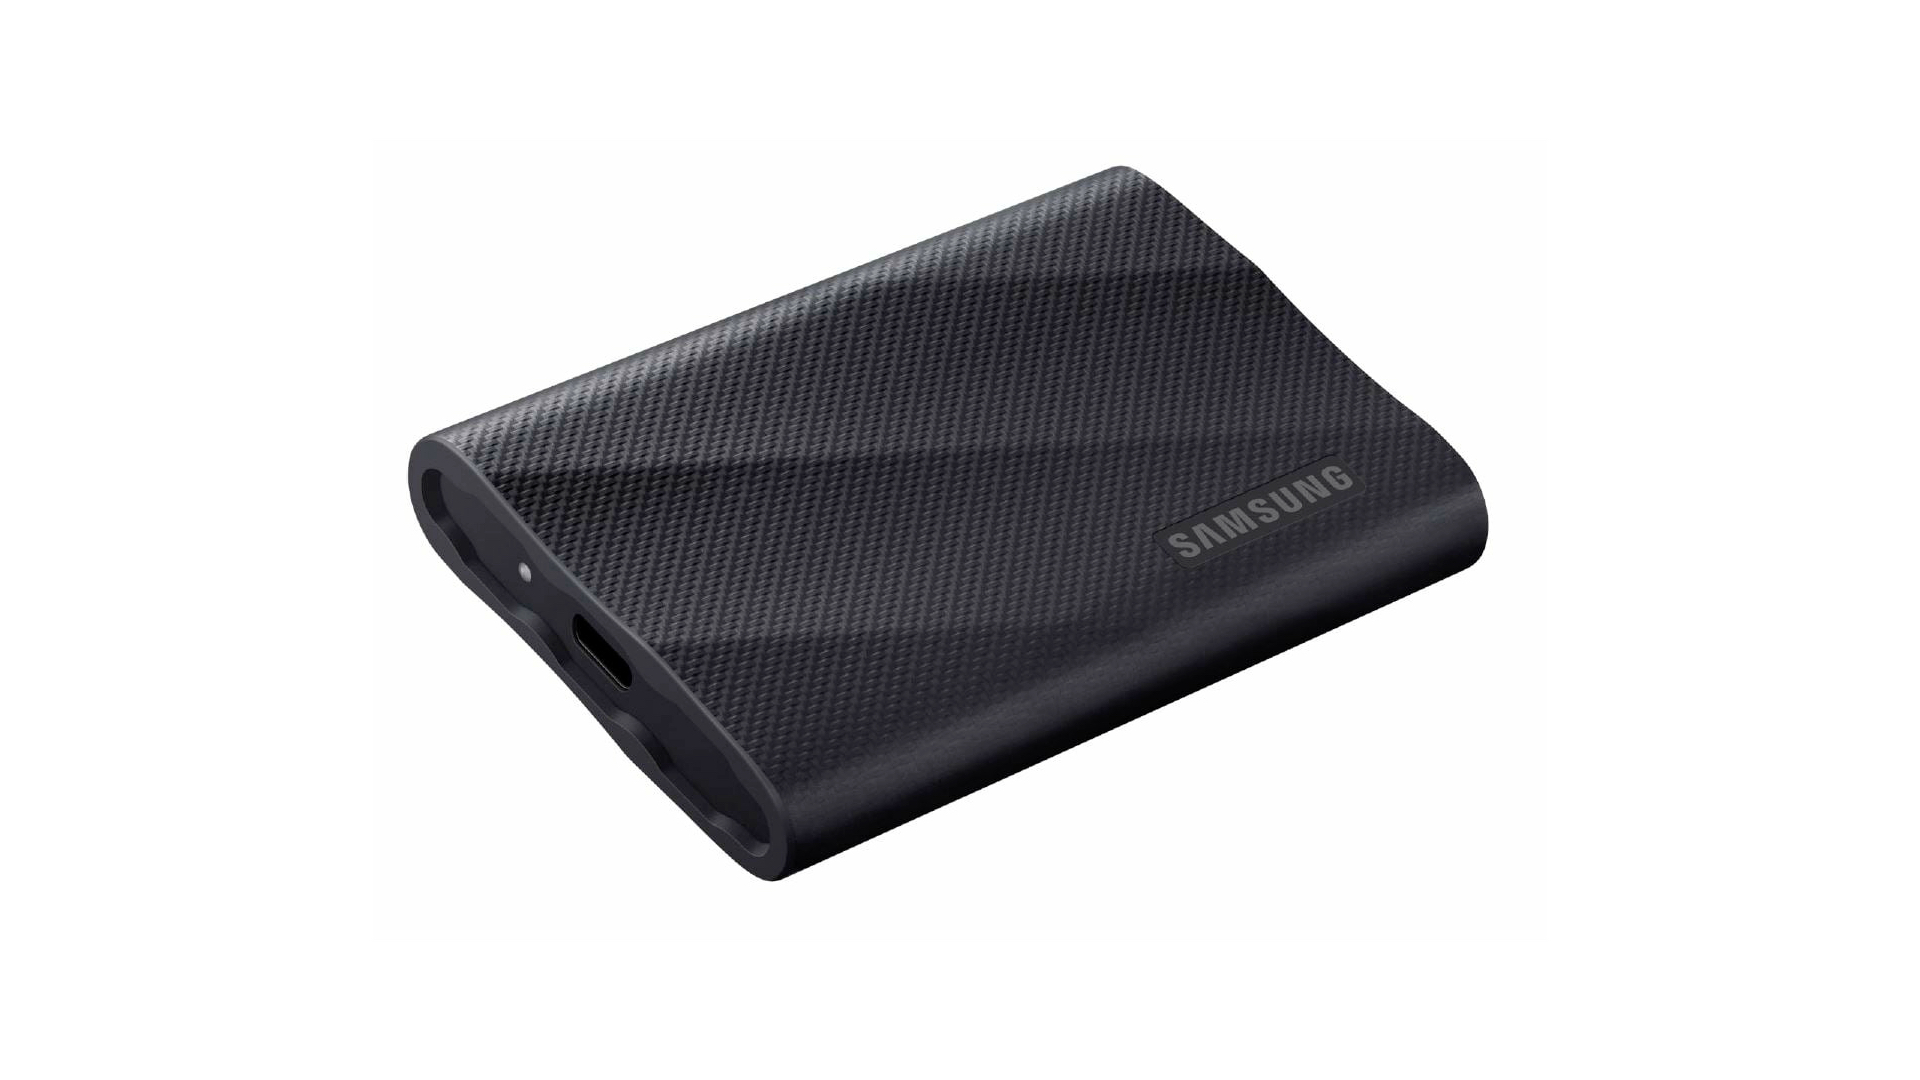 Samsung Portable SSD T9 leaks with Thunderbolt 4 connectivity - SamMobile